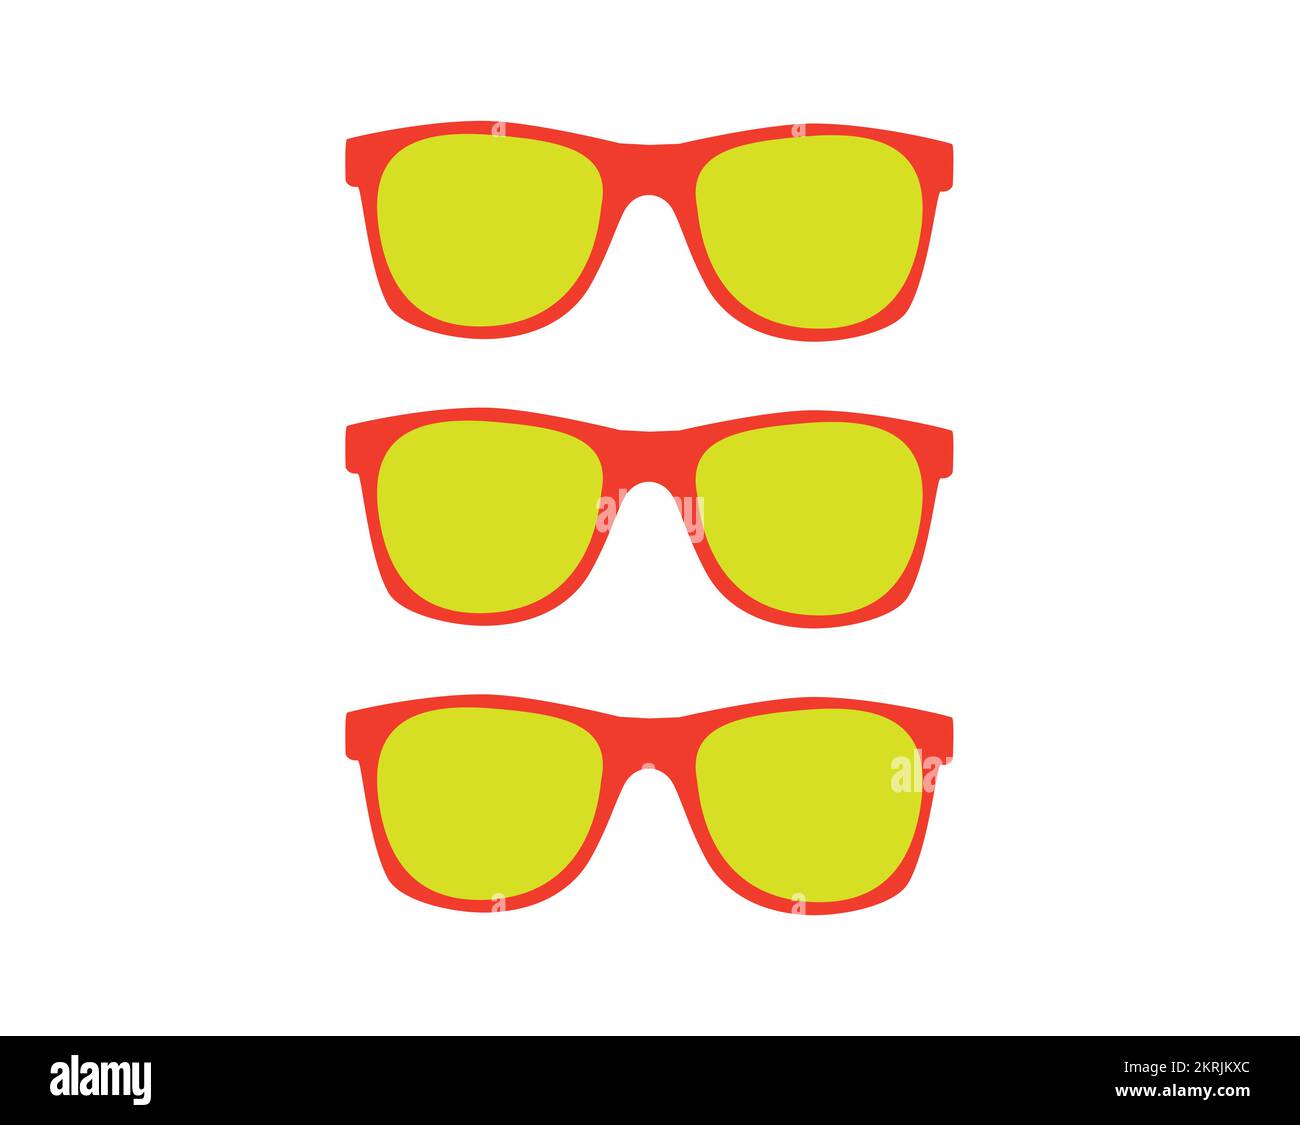 Alamy glasses and 30 vectors stock images Sun Page - - vector photography hi-res